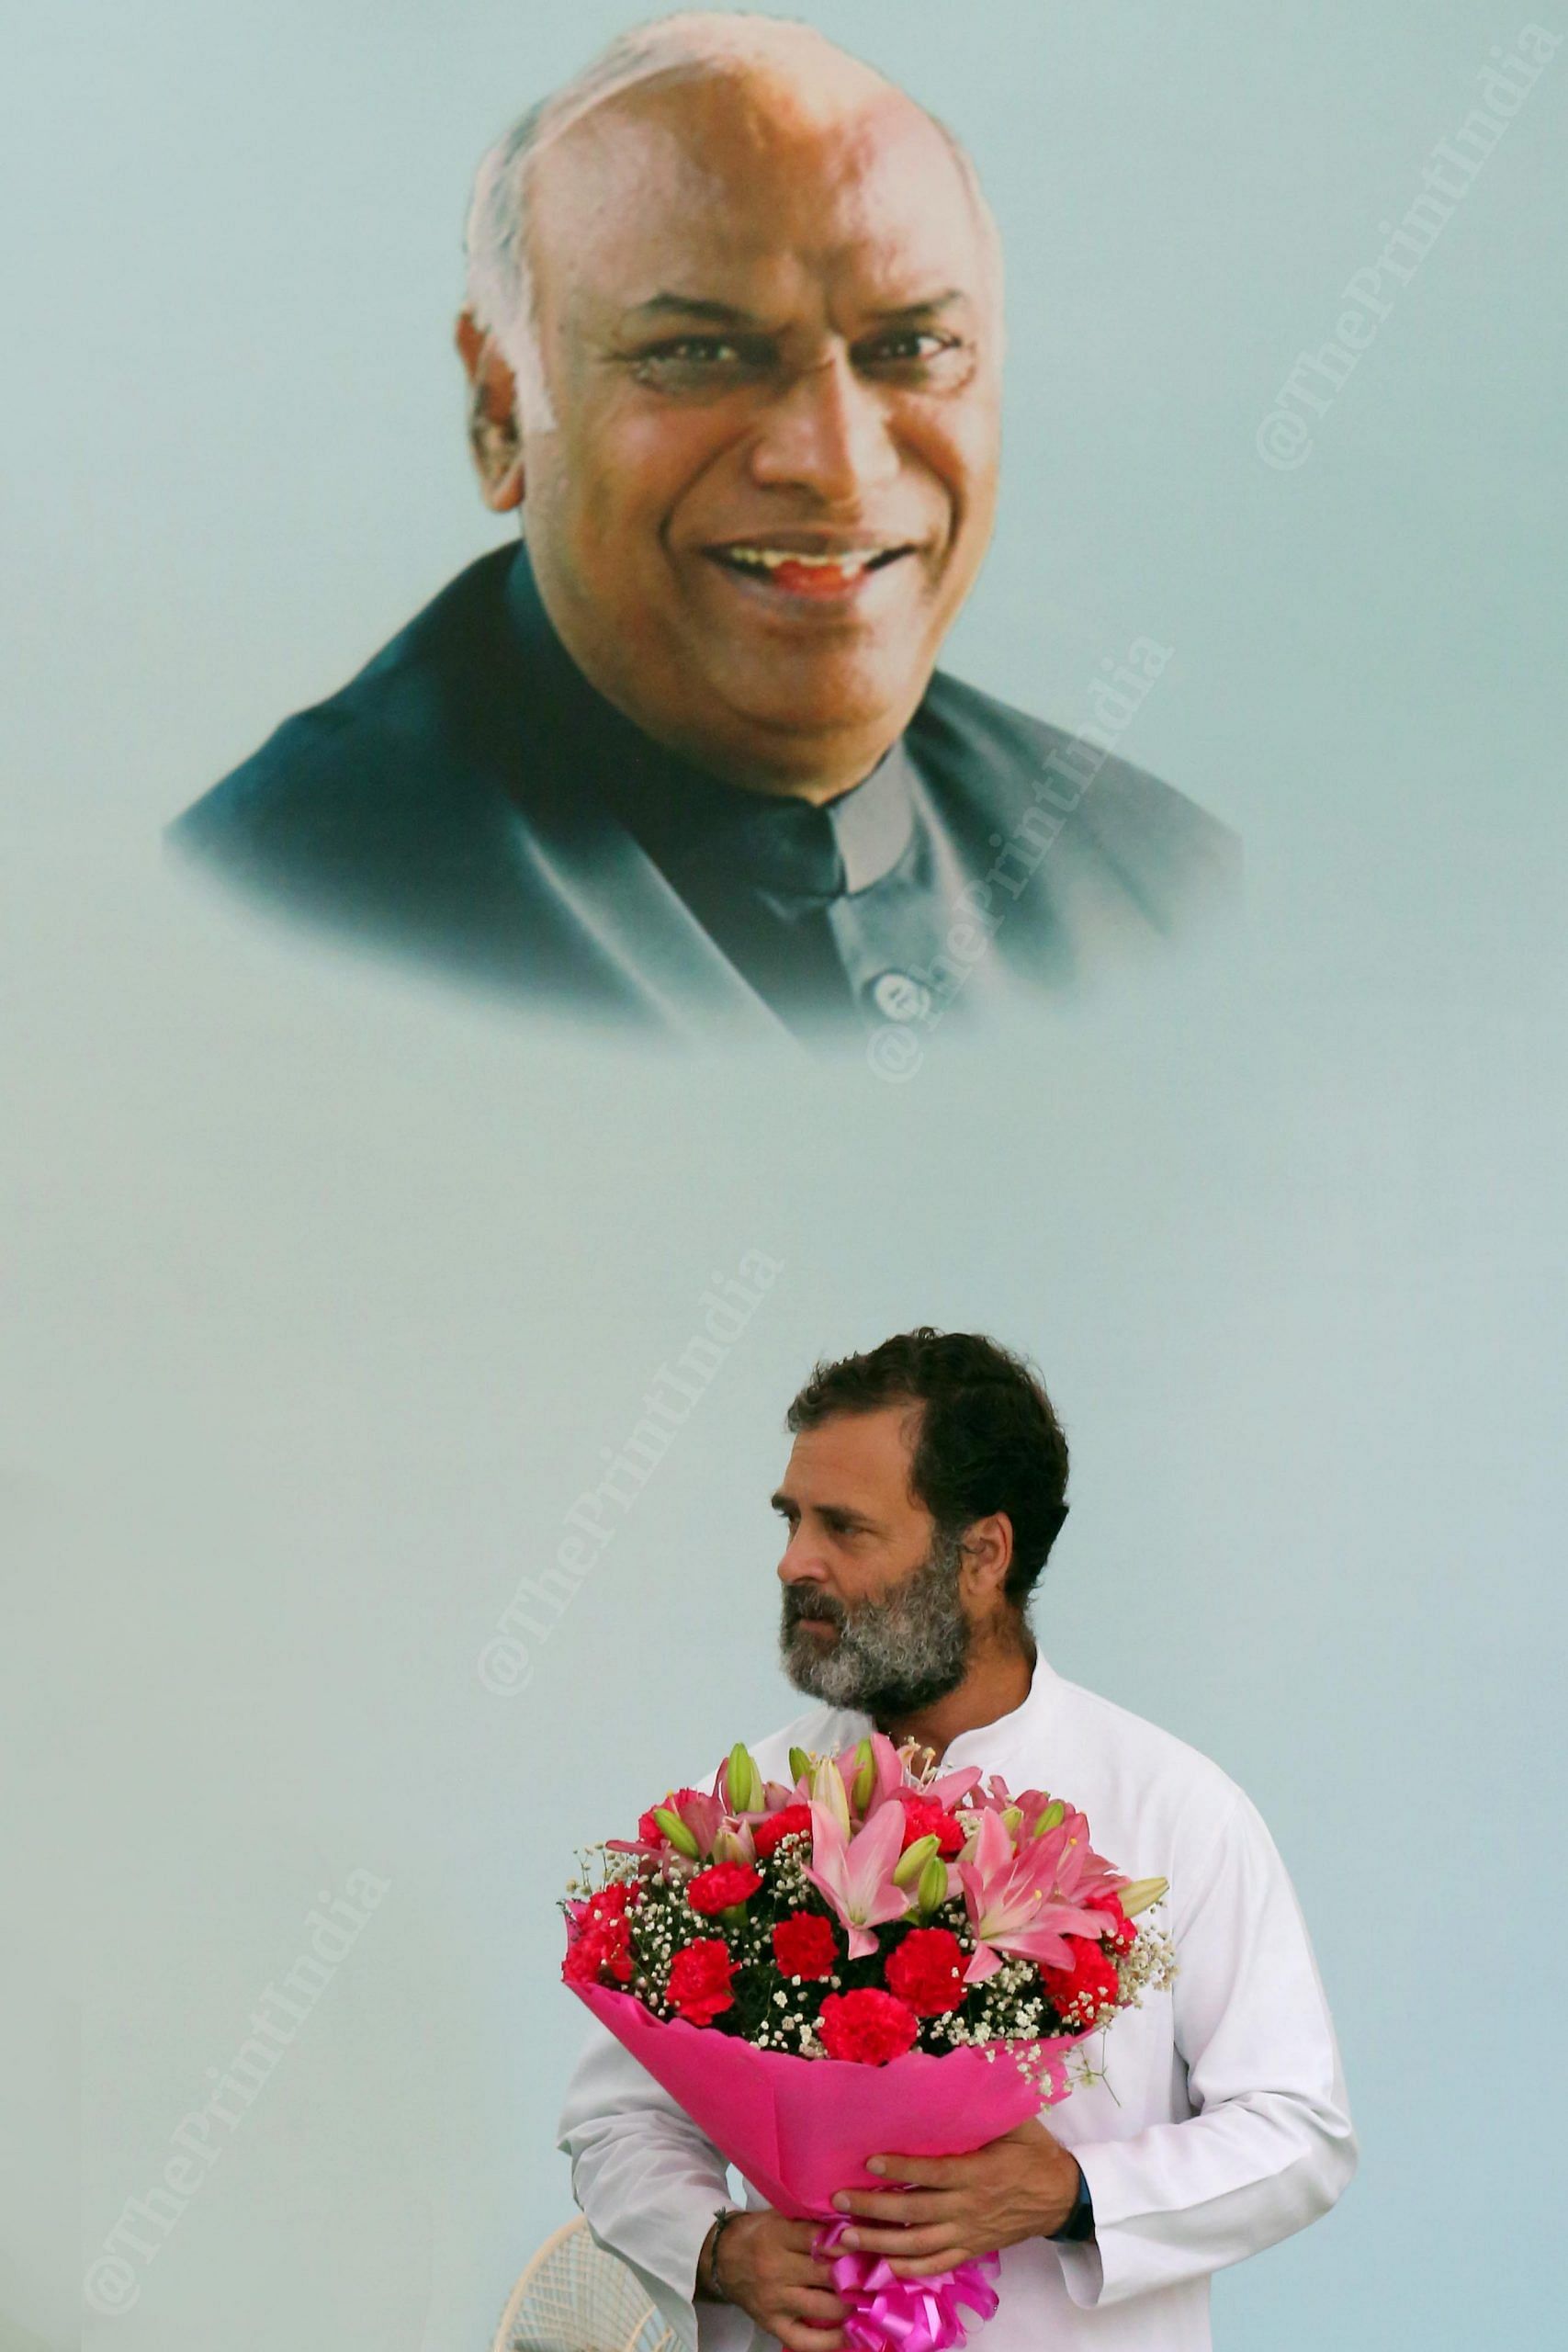 Congress Leader Rahul Gandhi present a bookey during a ceremony for presentation of certificate of election to the former, at AICC Headquarters | Praveen Jain | ThePrint